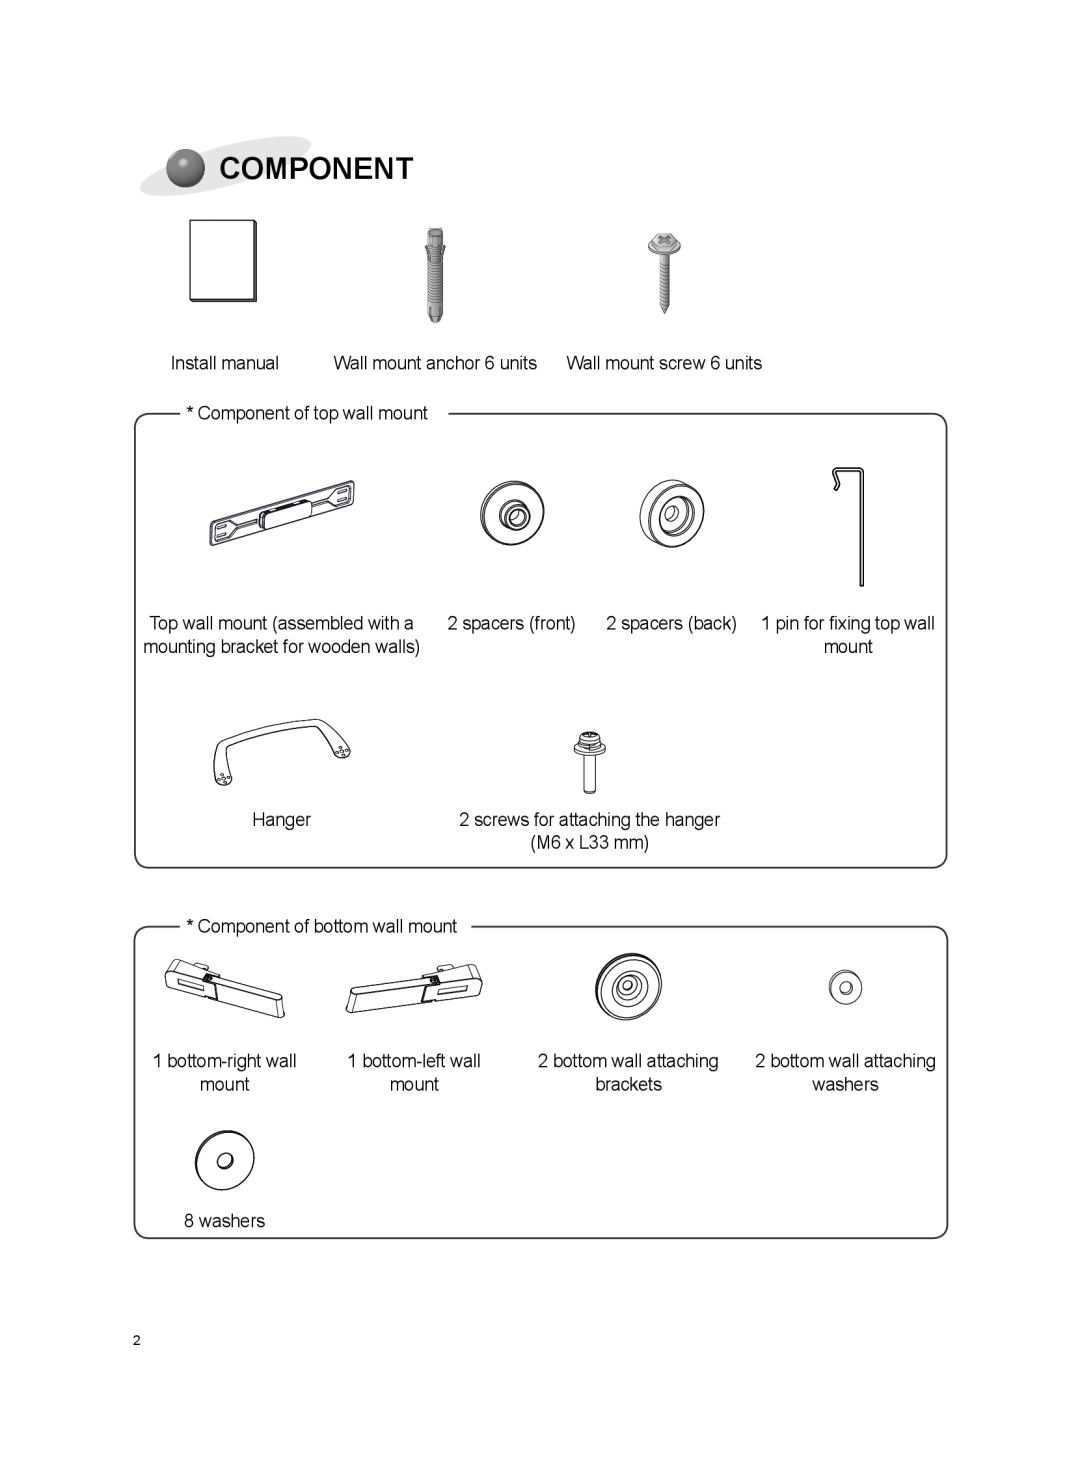 LG Electronics OSW100 Install manual, Wall mount anchor 6 units, Component of top wall mount, spacers front, Hanger 